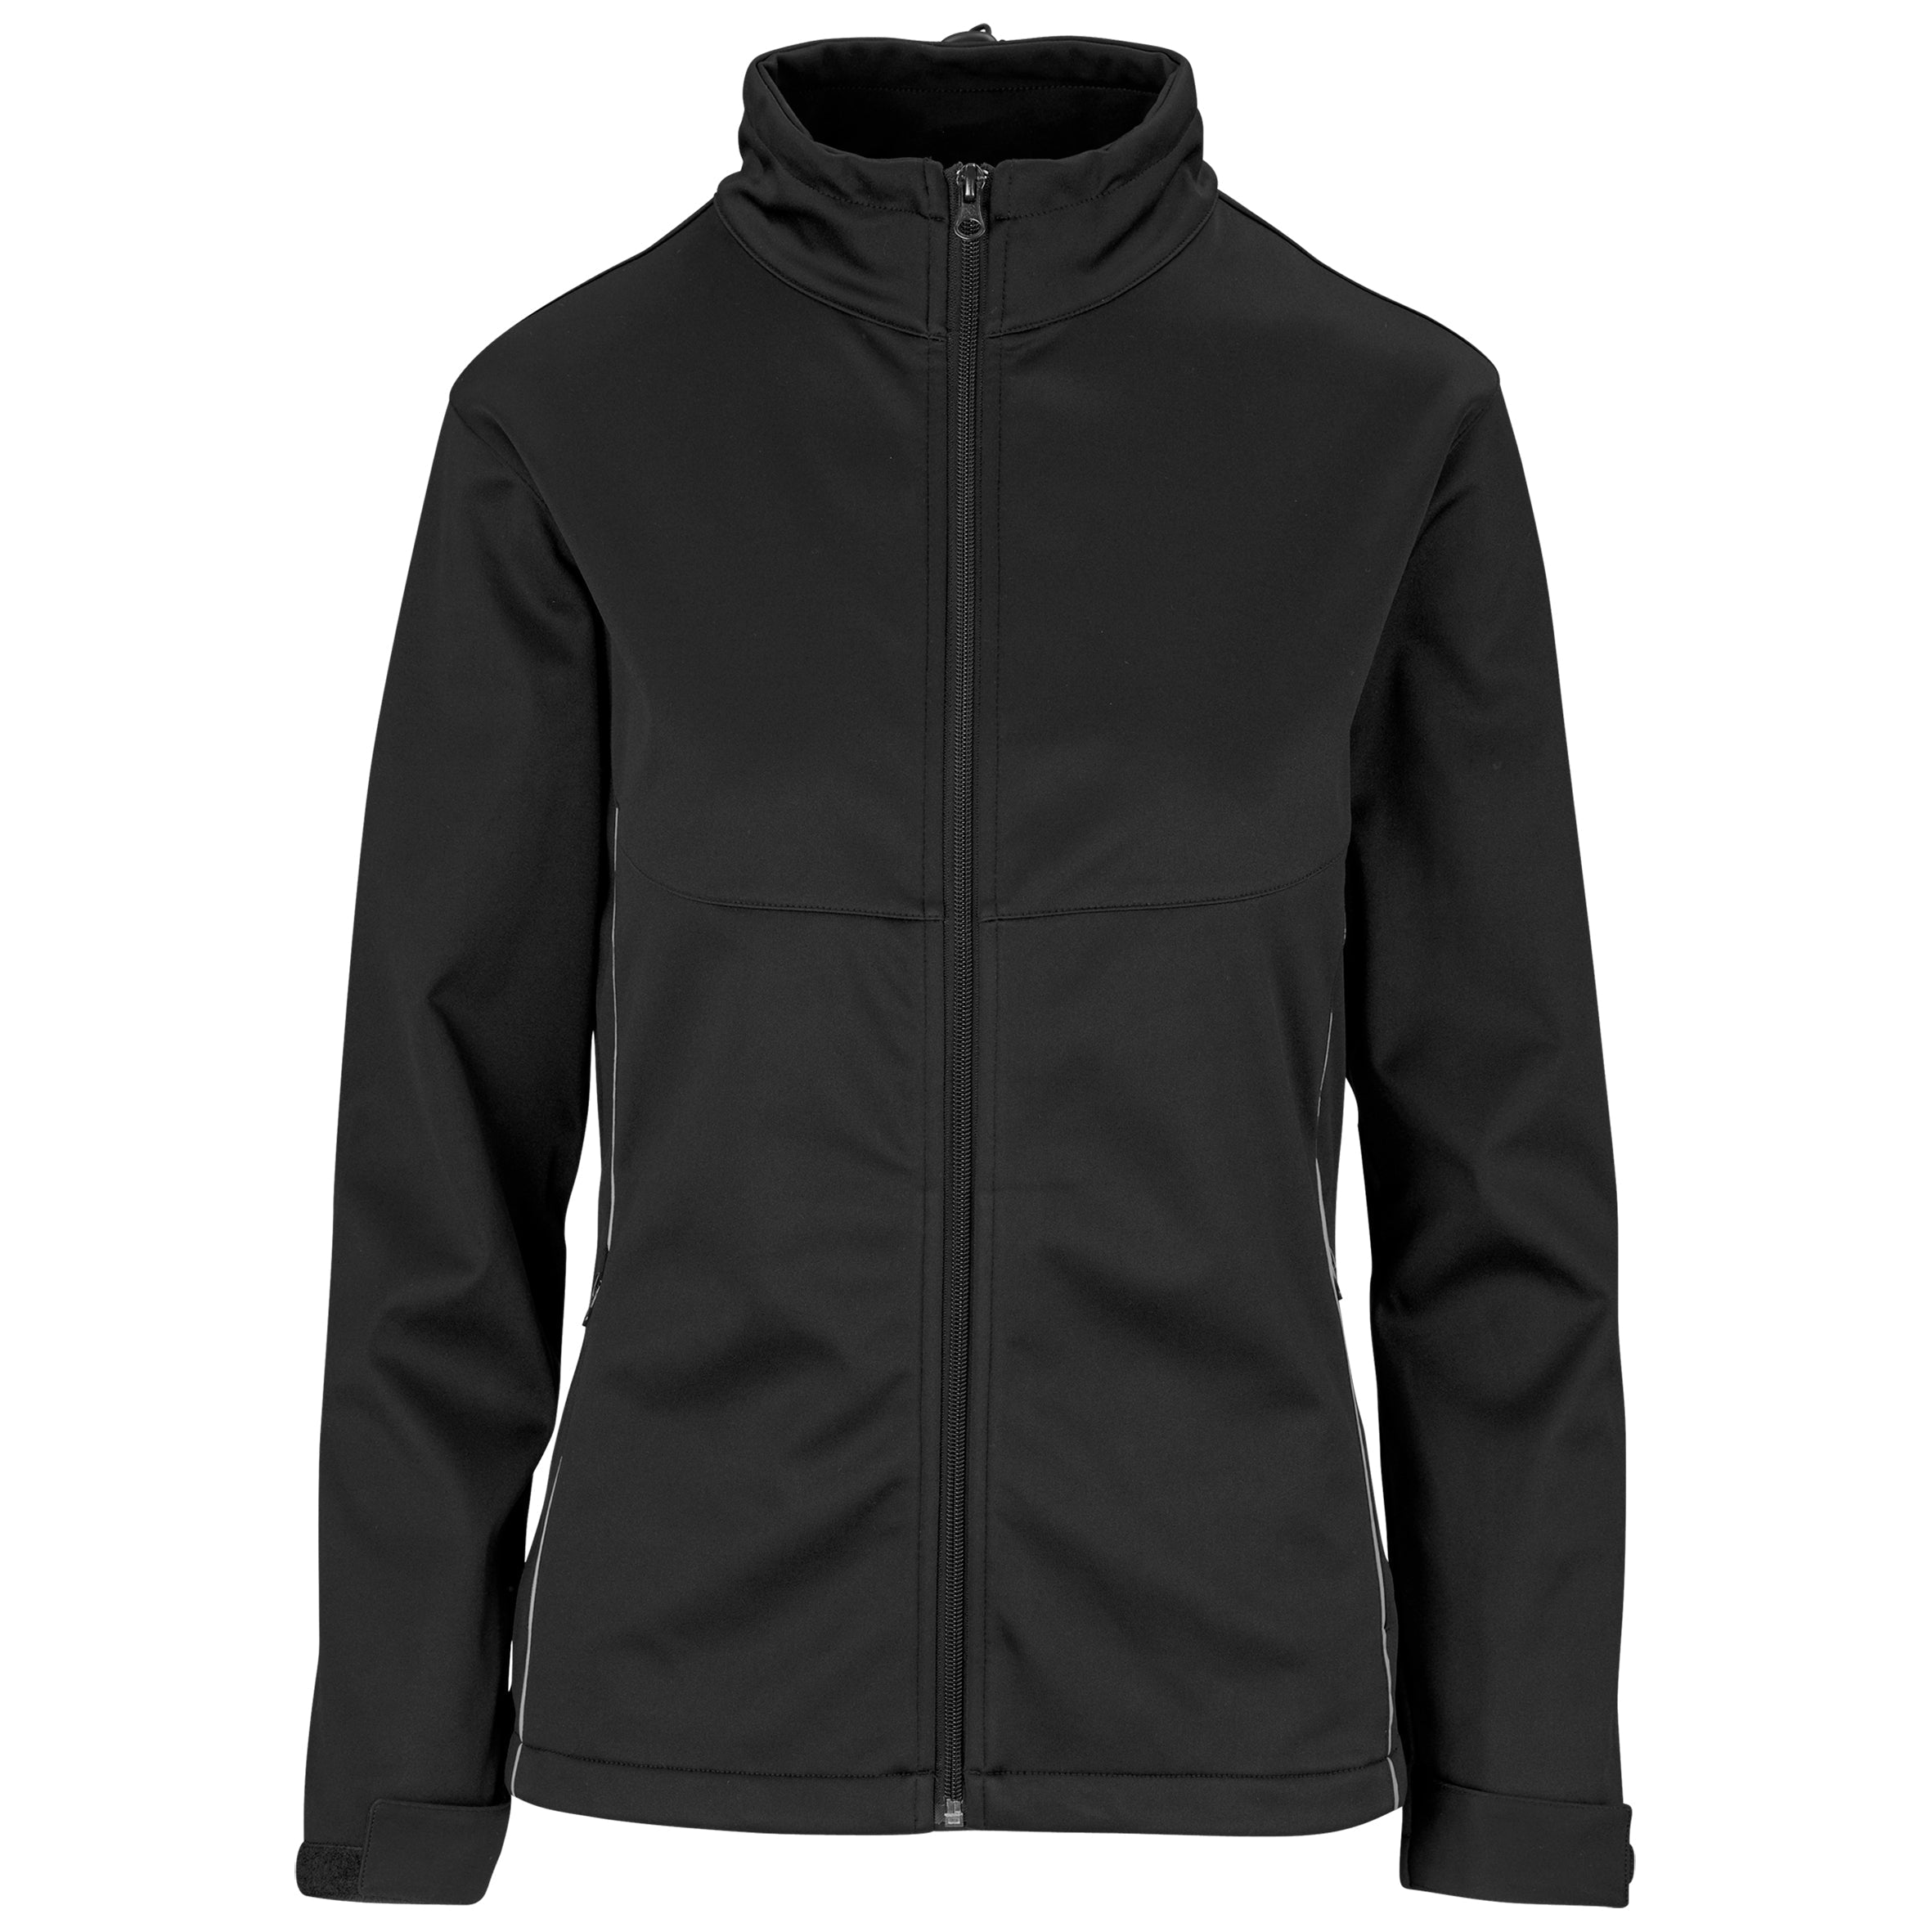 Ladies Cromwell Softshell Jacket - Red Only-2XL-Black-BL